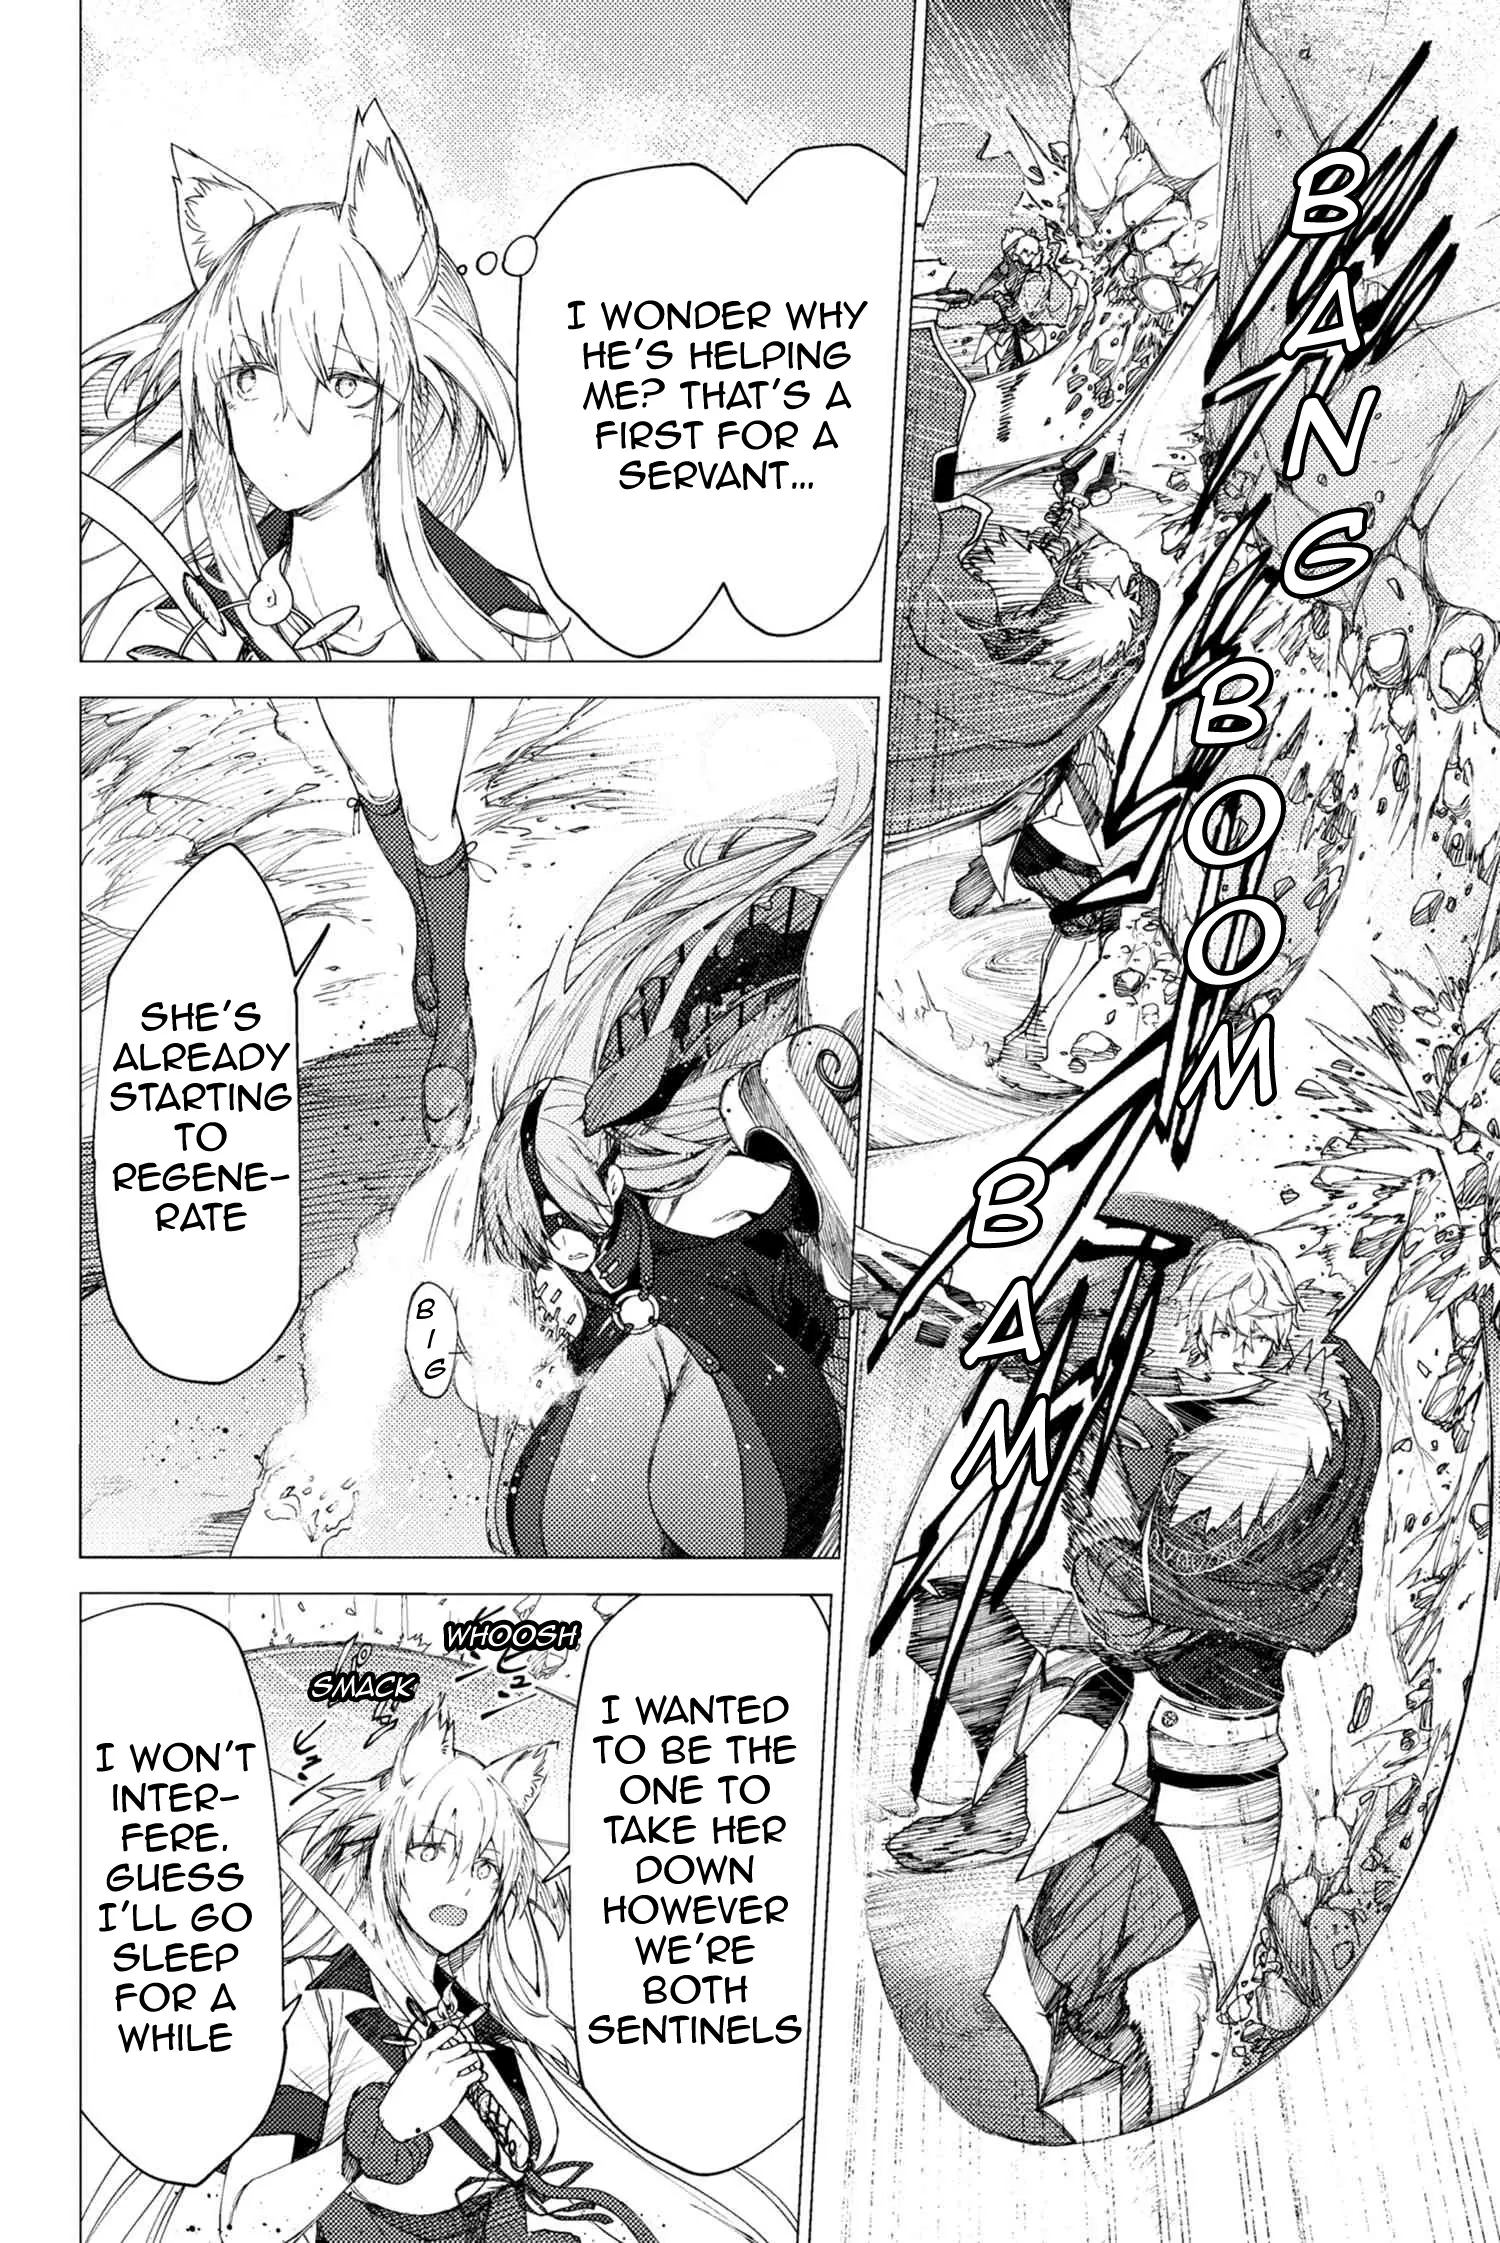 Fate/grand Order -Epic Of Remnant- Deep Sea Cyber-Paradise Se.ra.ph - 3.1 page 6